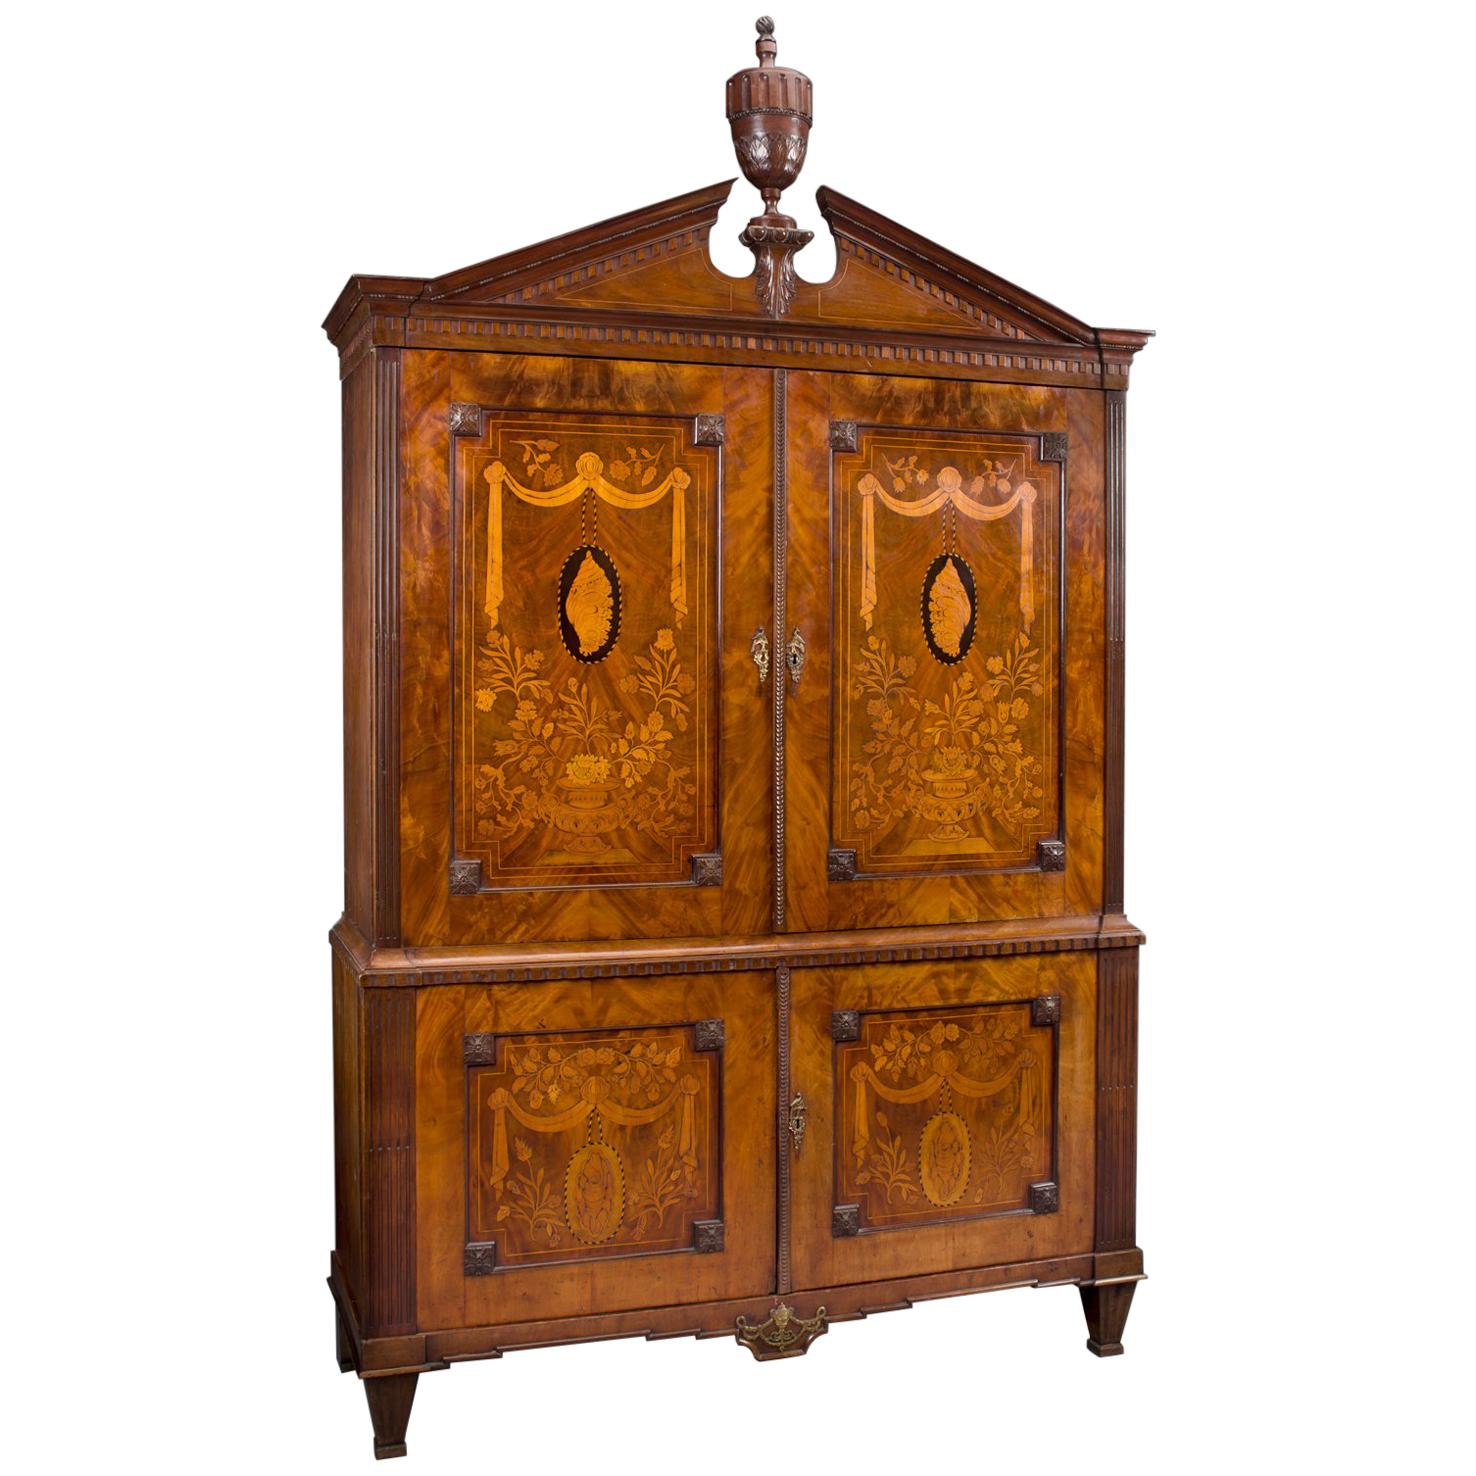 An 18th Century Neoclassical Mahogany Armoire With Marquetry Inlay, Circa 1770 For Sale